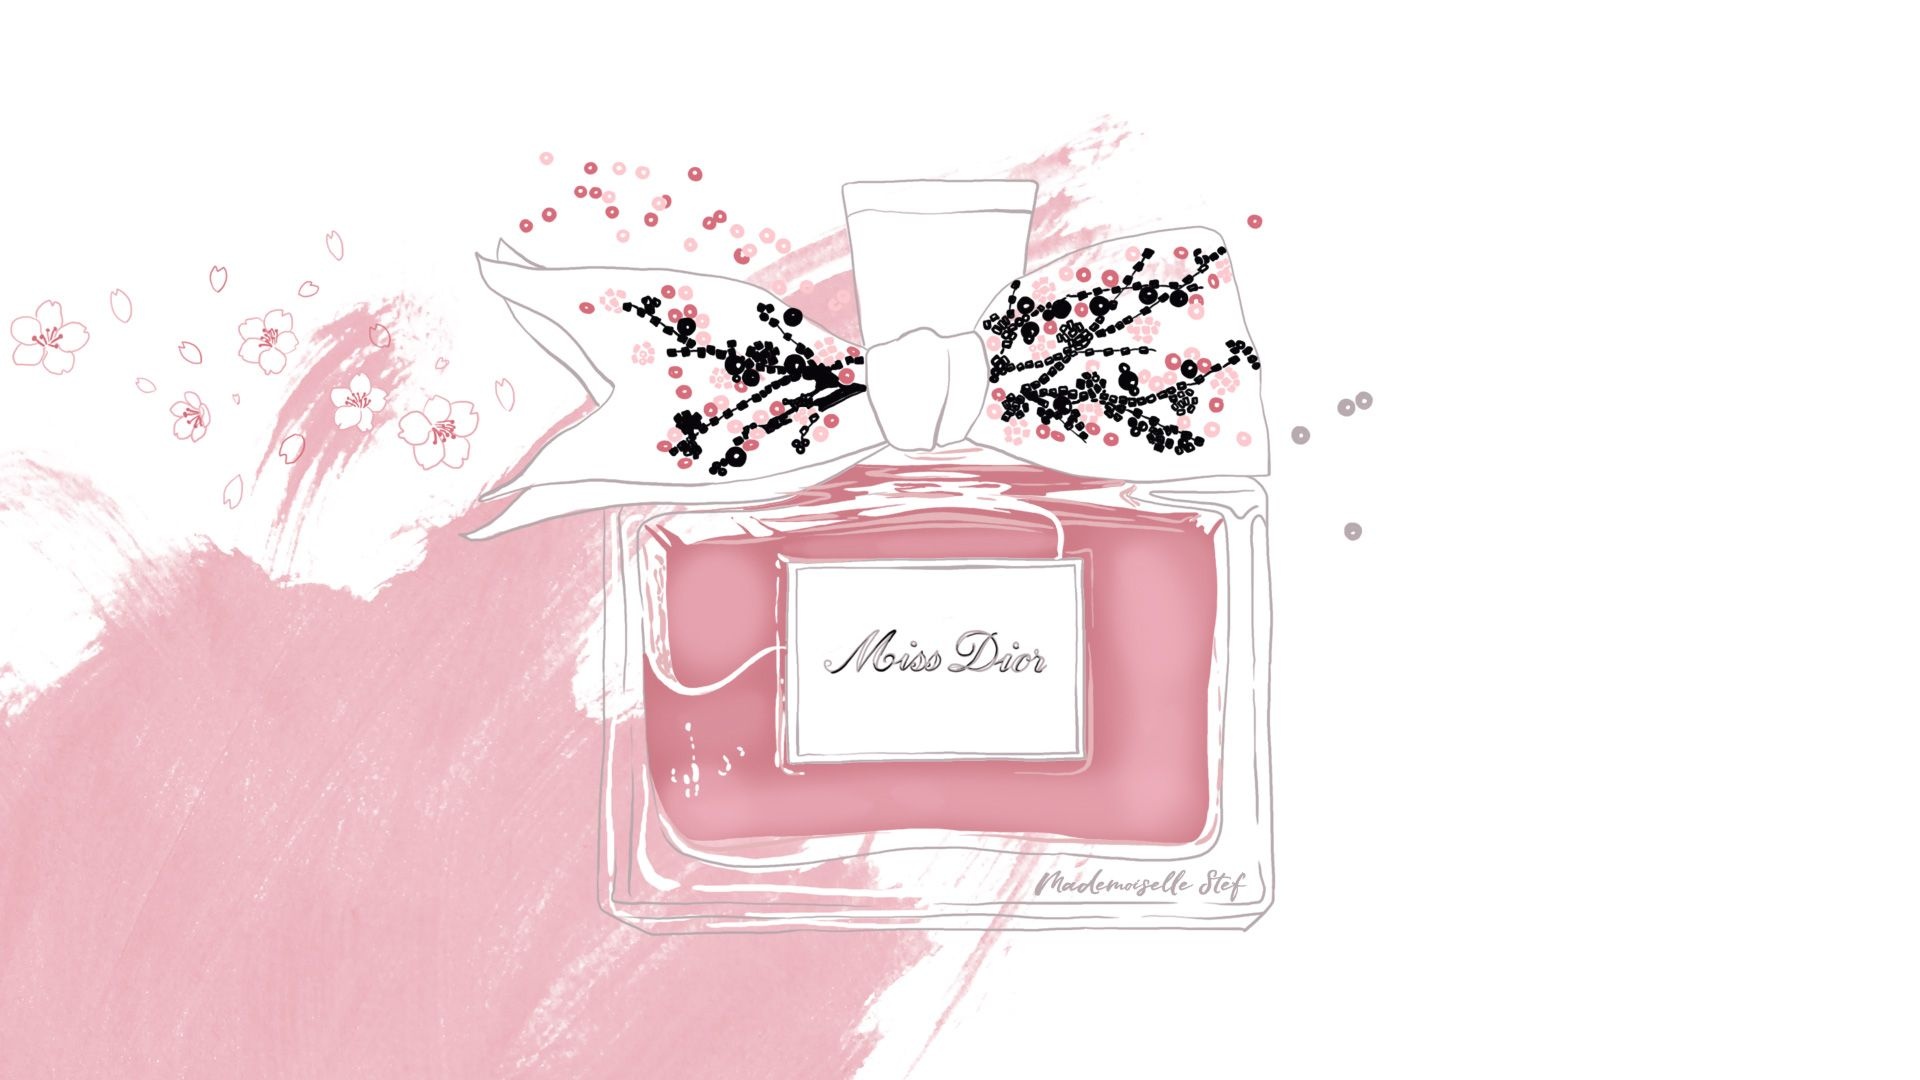 Dior: Miss Dior, A perfume released in 1947, Illustration. 1920x1080 Full HD Wallpaper.